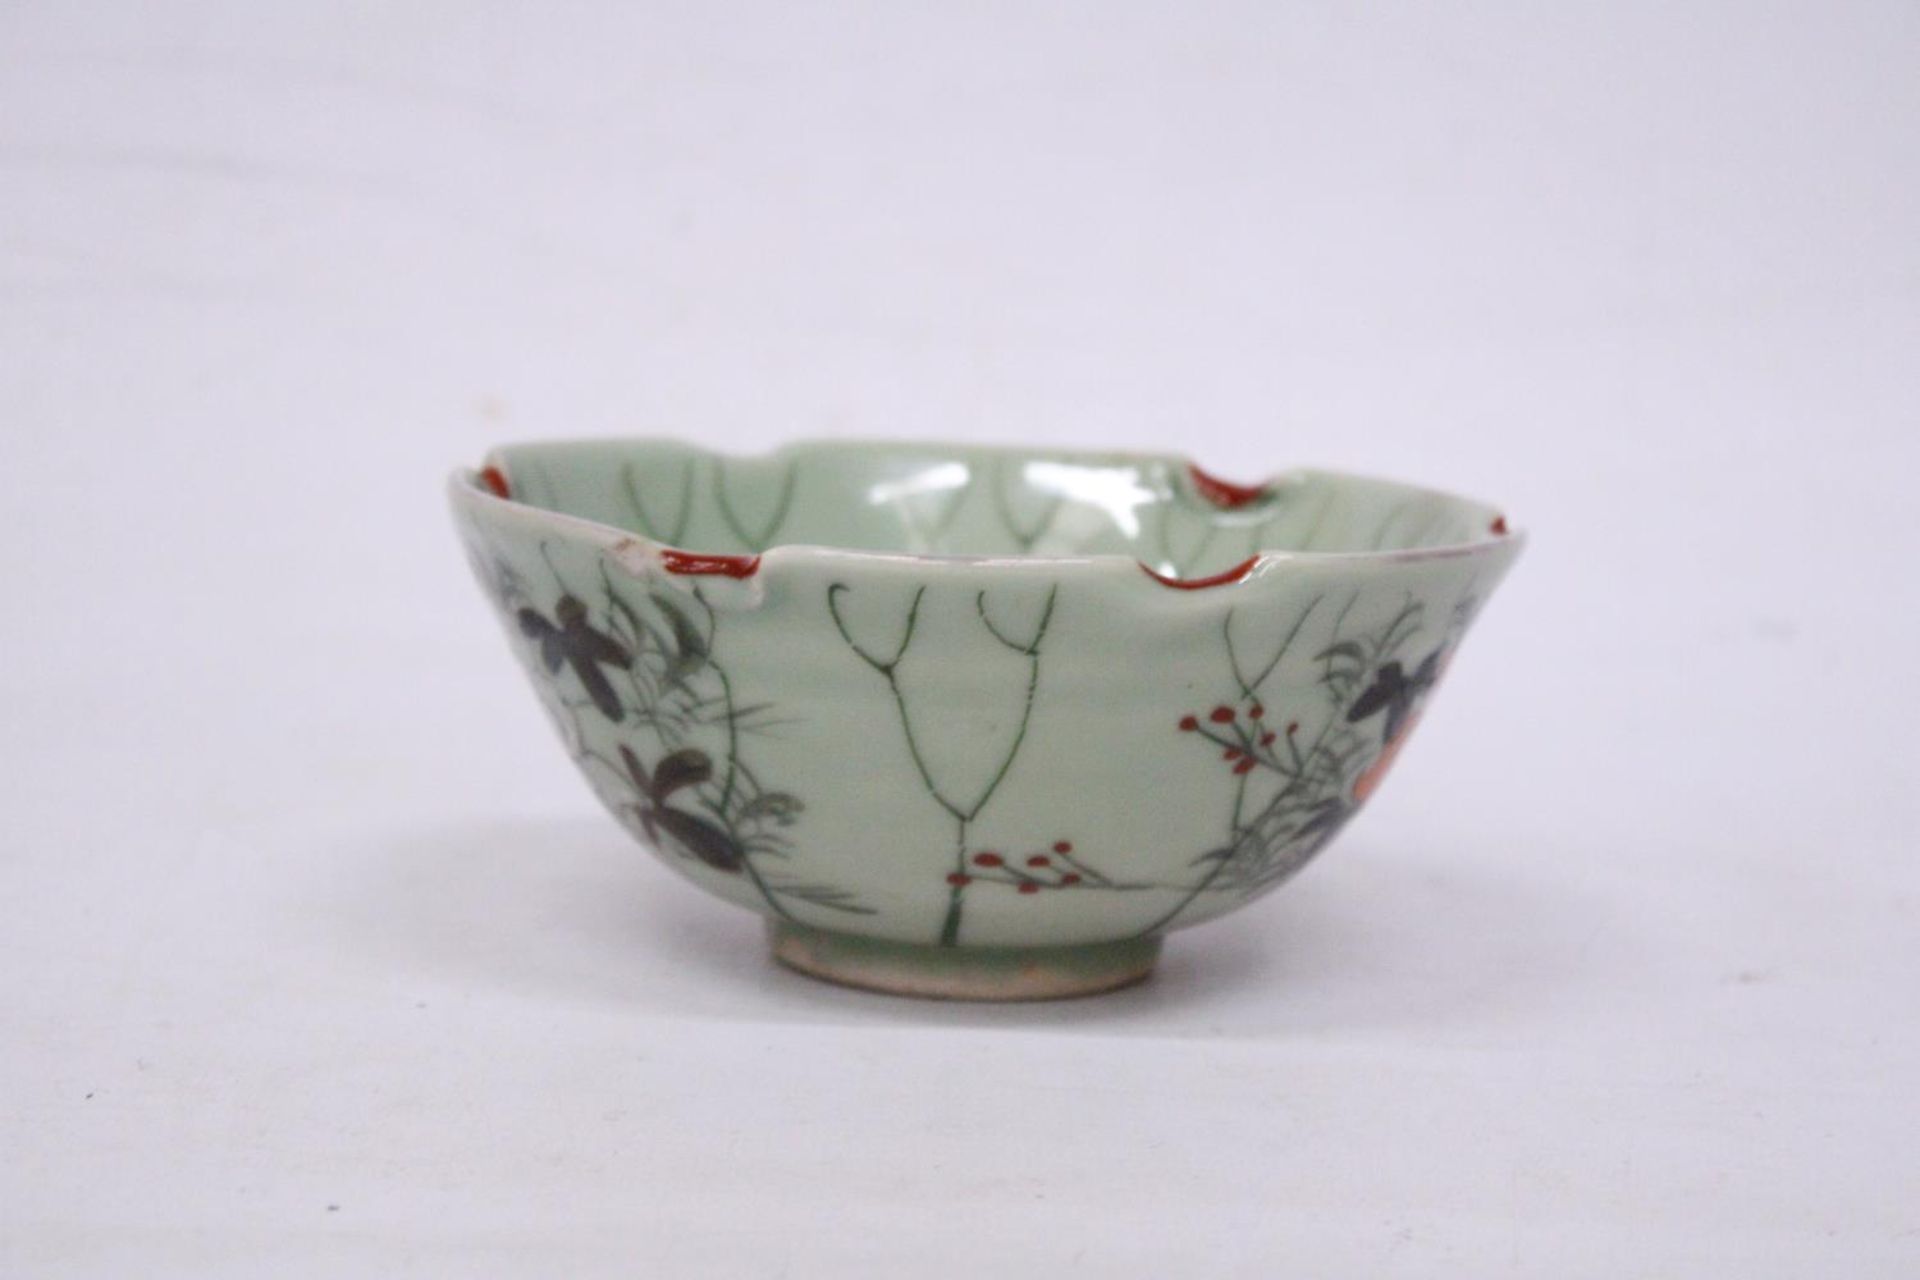 A CHINESE PORCELAIN GLAZED FOOTED BOWL WITH FLORAL DECORATION - Image 5 of 7